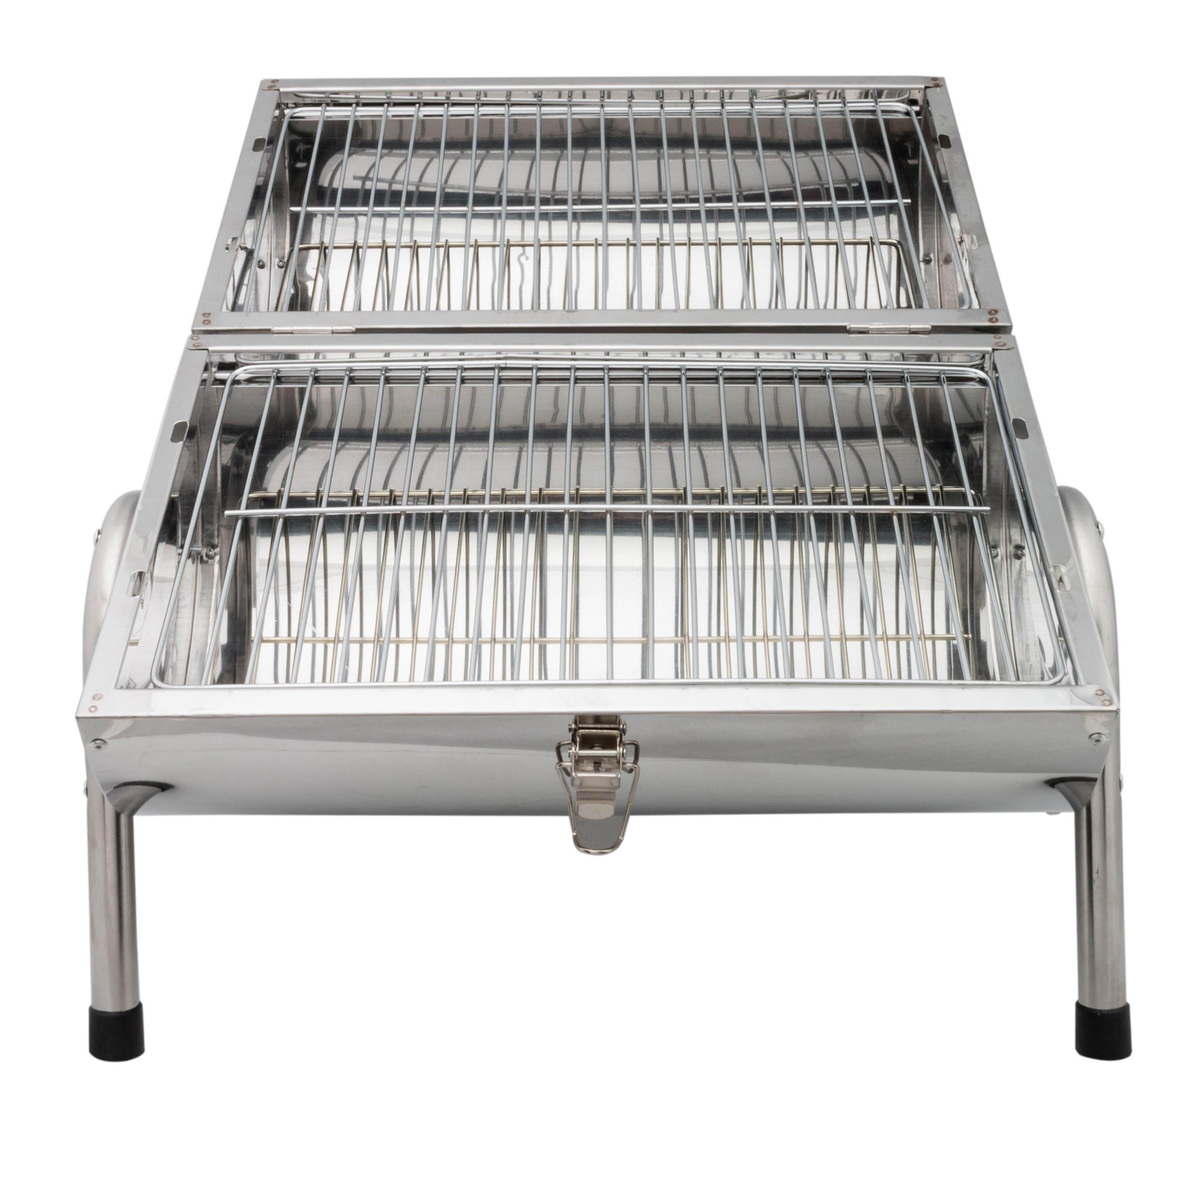 Campmate Stainless Steel BBQ Grill Stand, BBQG-22012